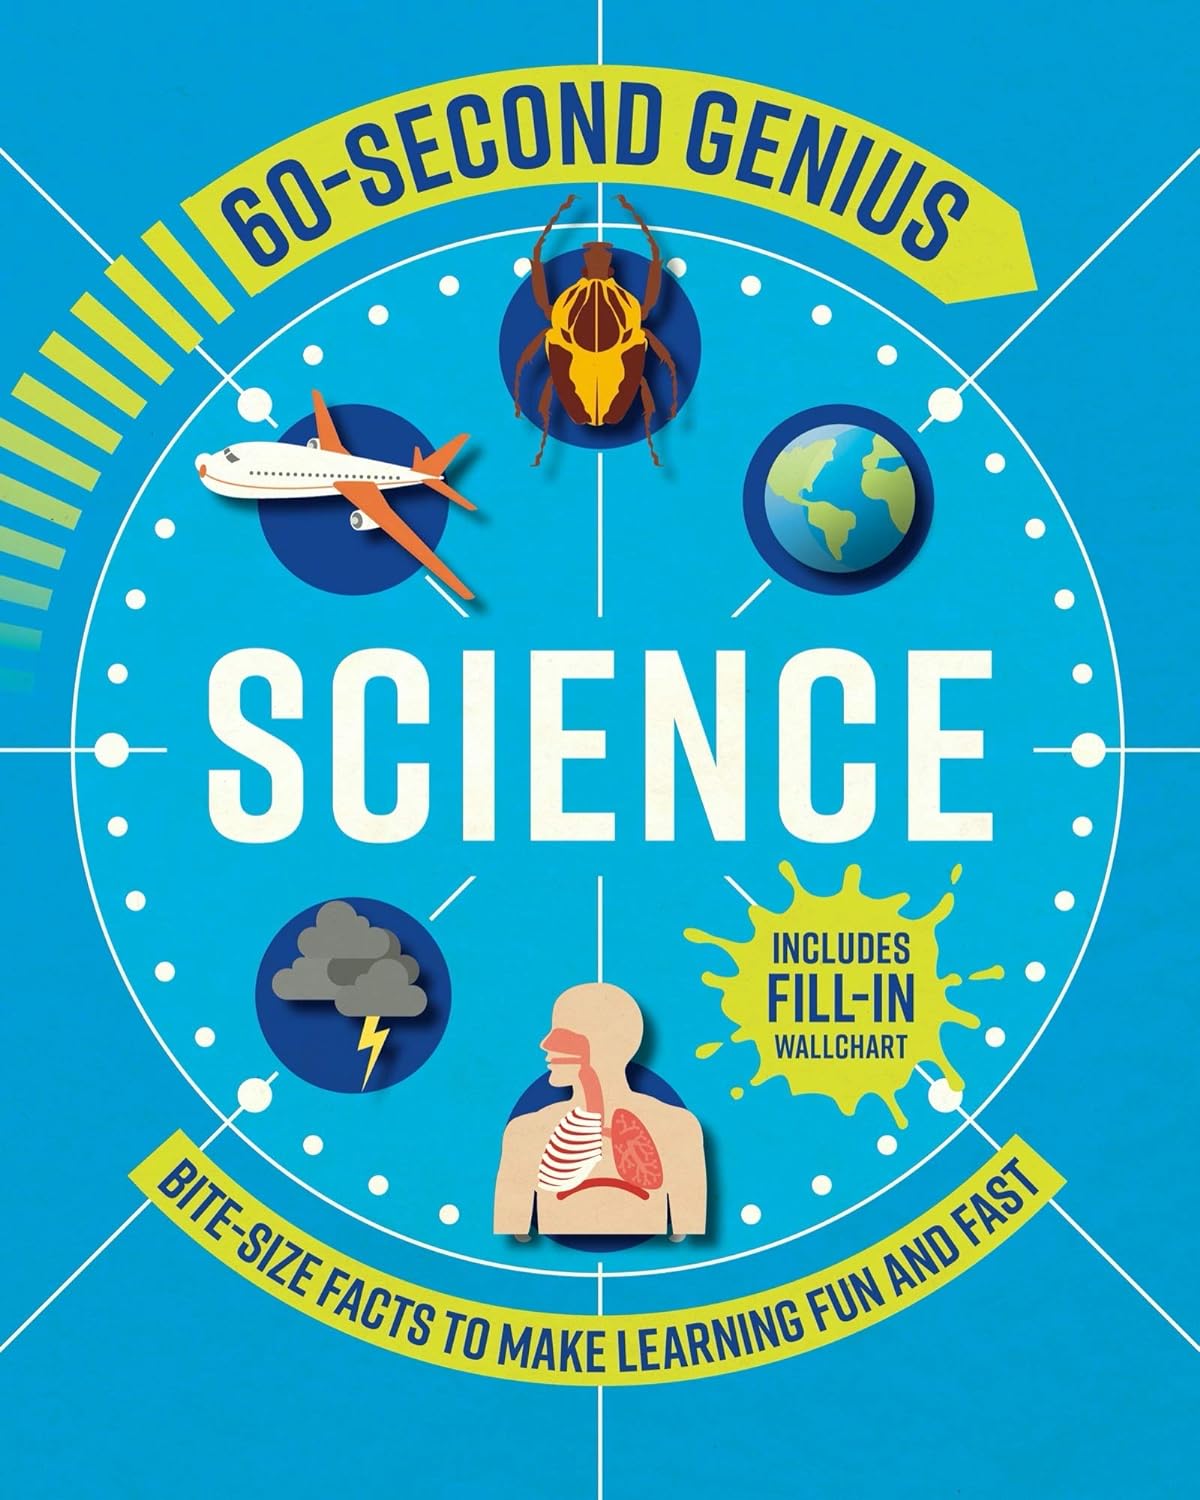 60 Second Genius: Science: Bite-size facts to make learning fun and fast - Original